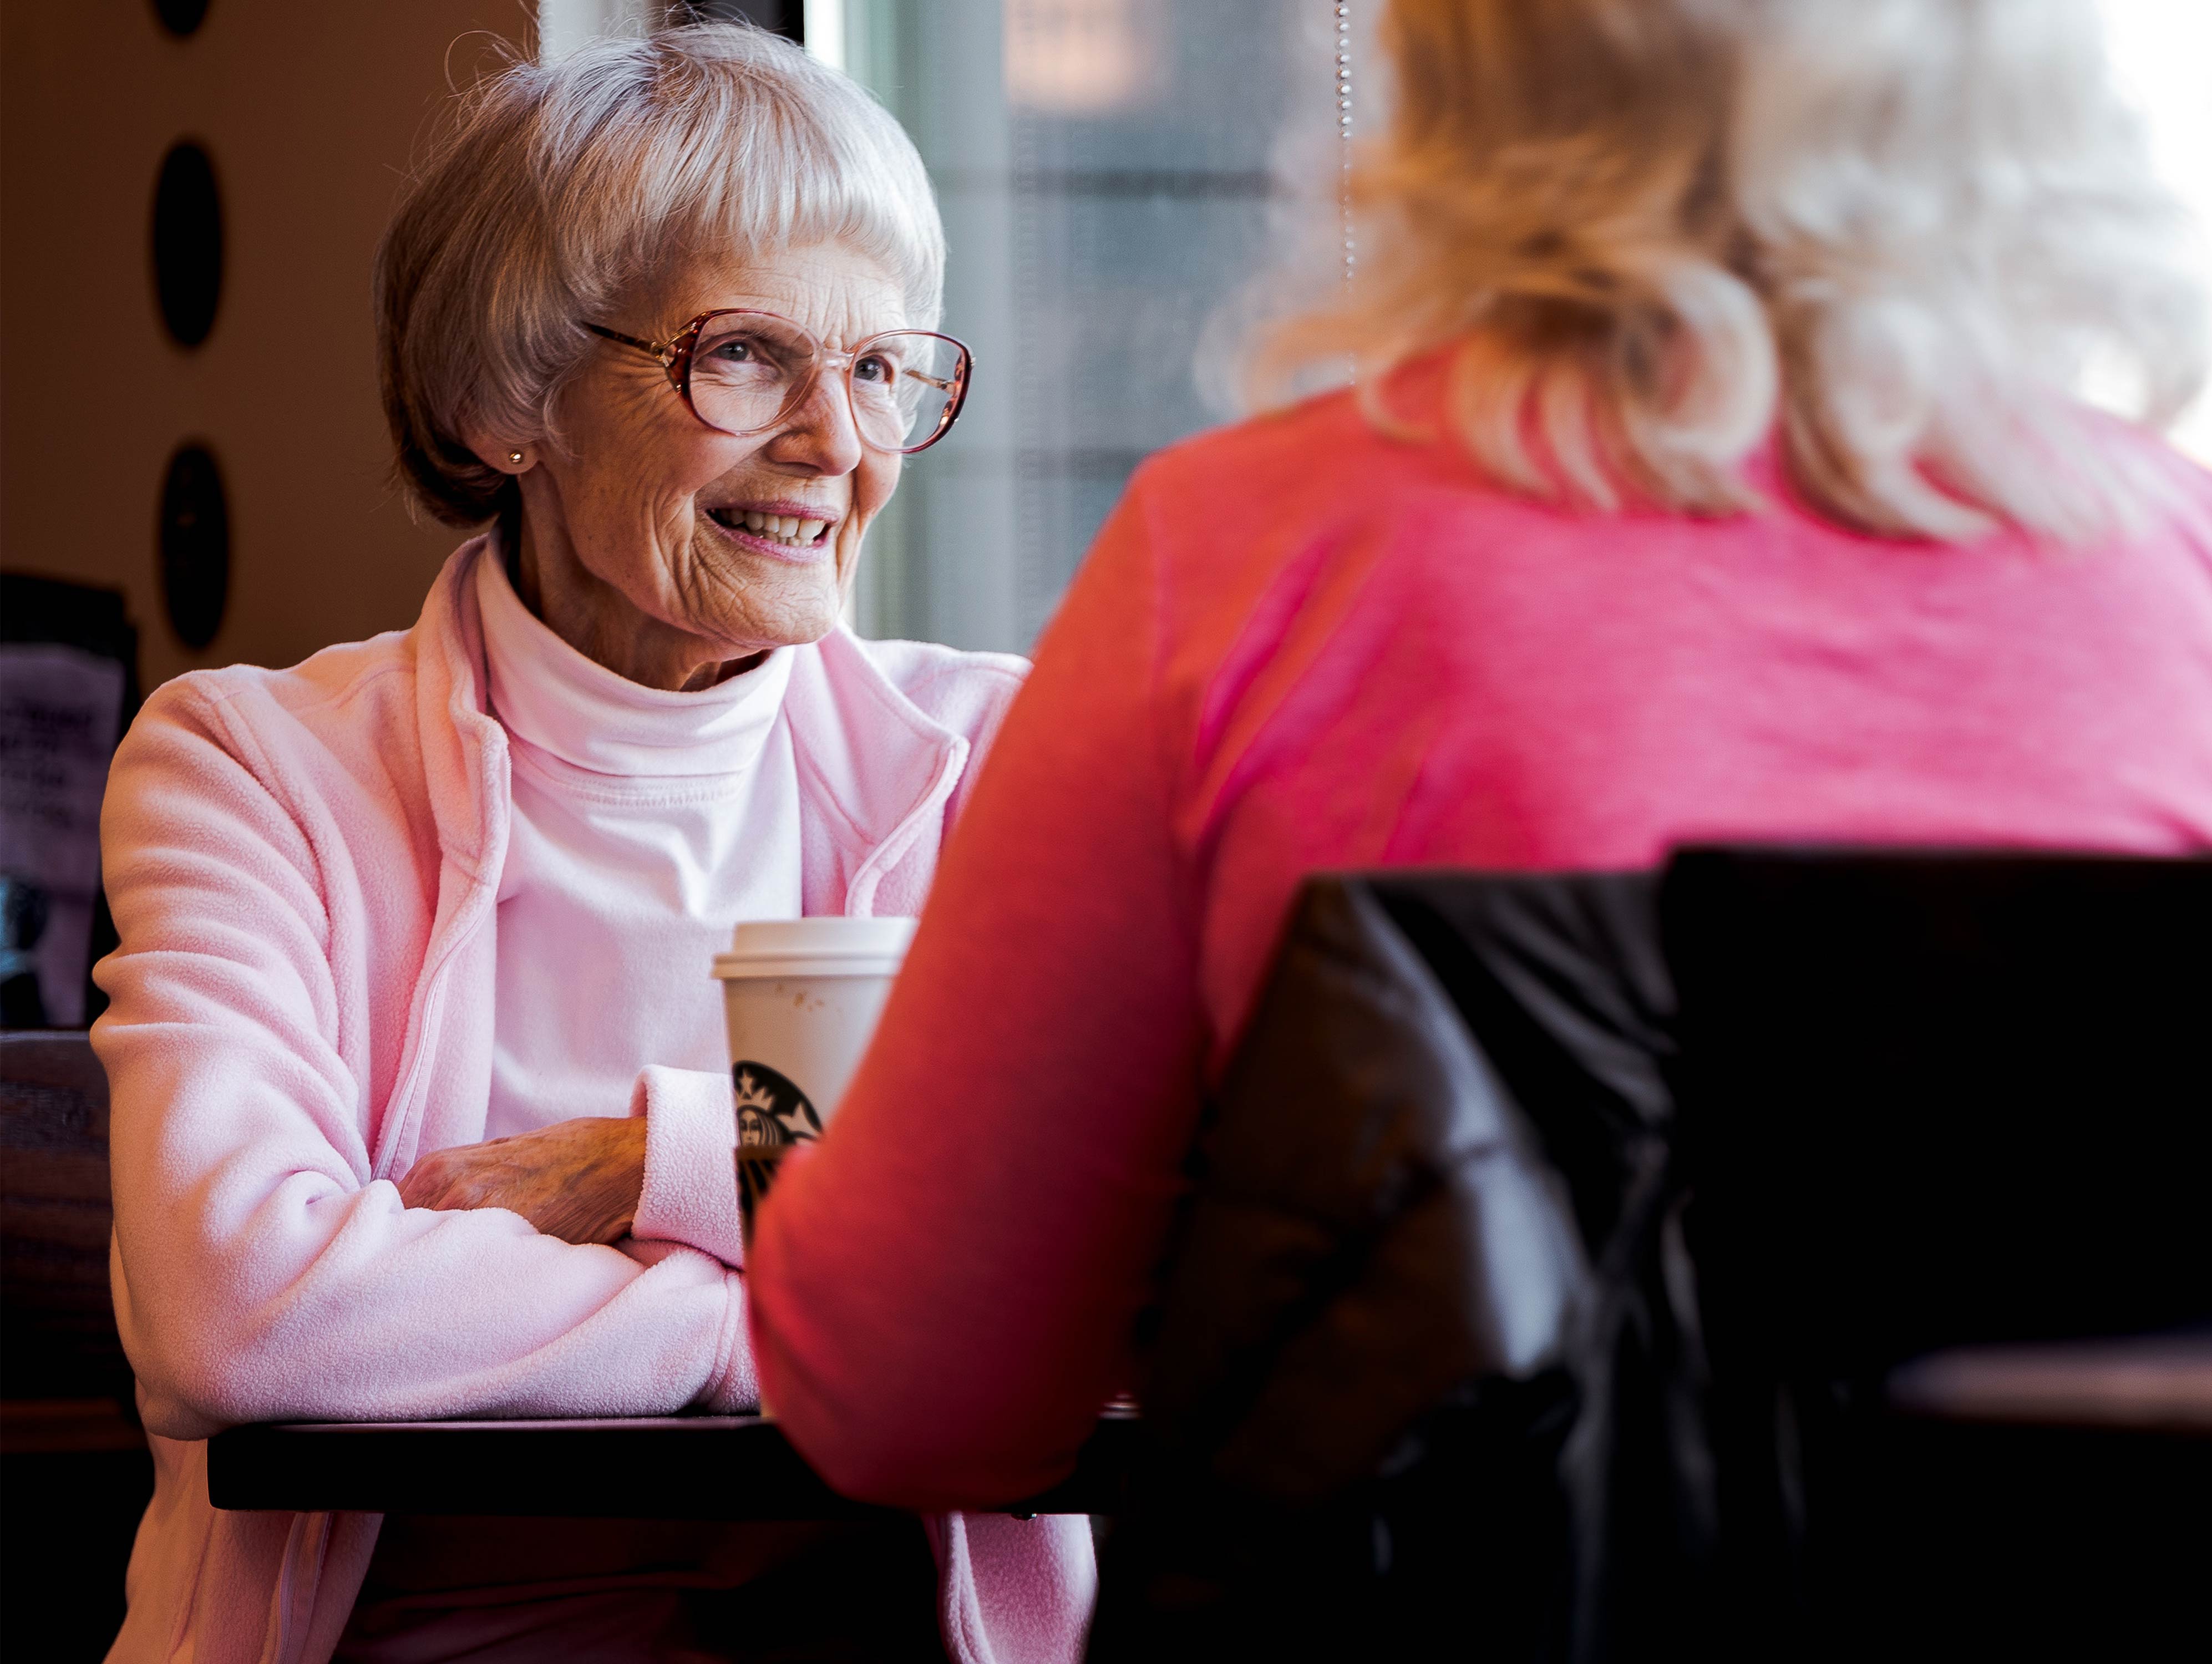 Image credit: https://www.pexels.com/photo/photo-of-old-woman-sitting-while-talking-with-another-woman-3729182/